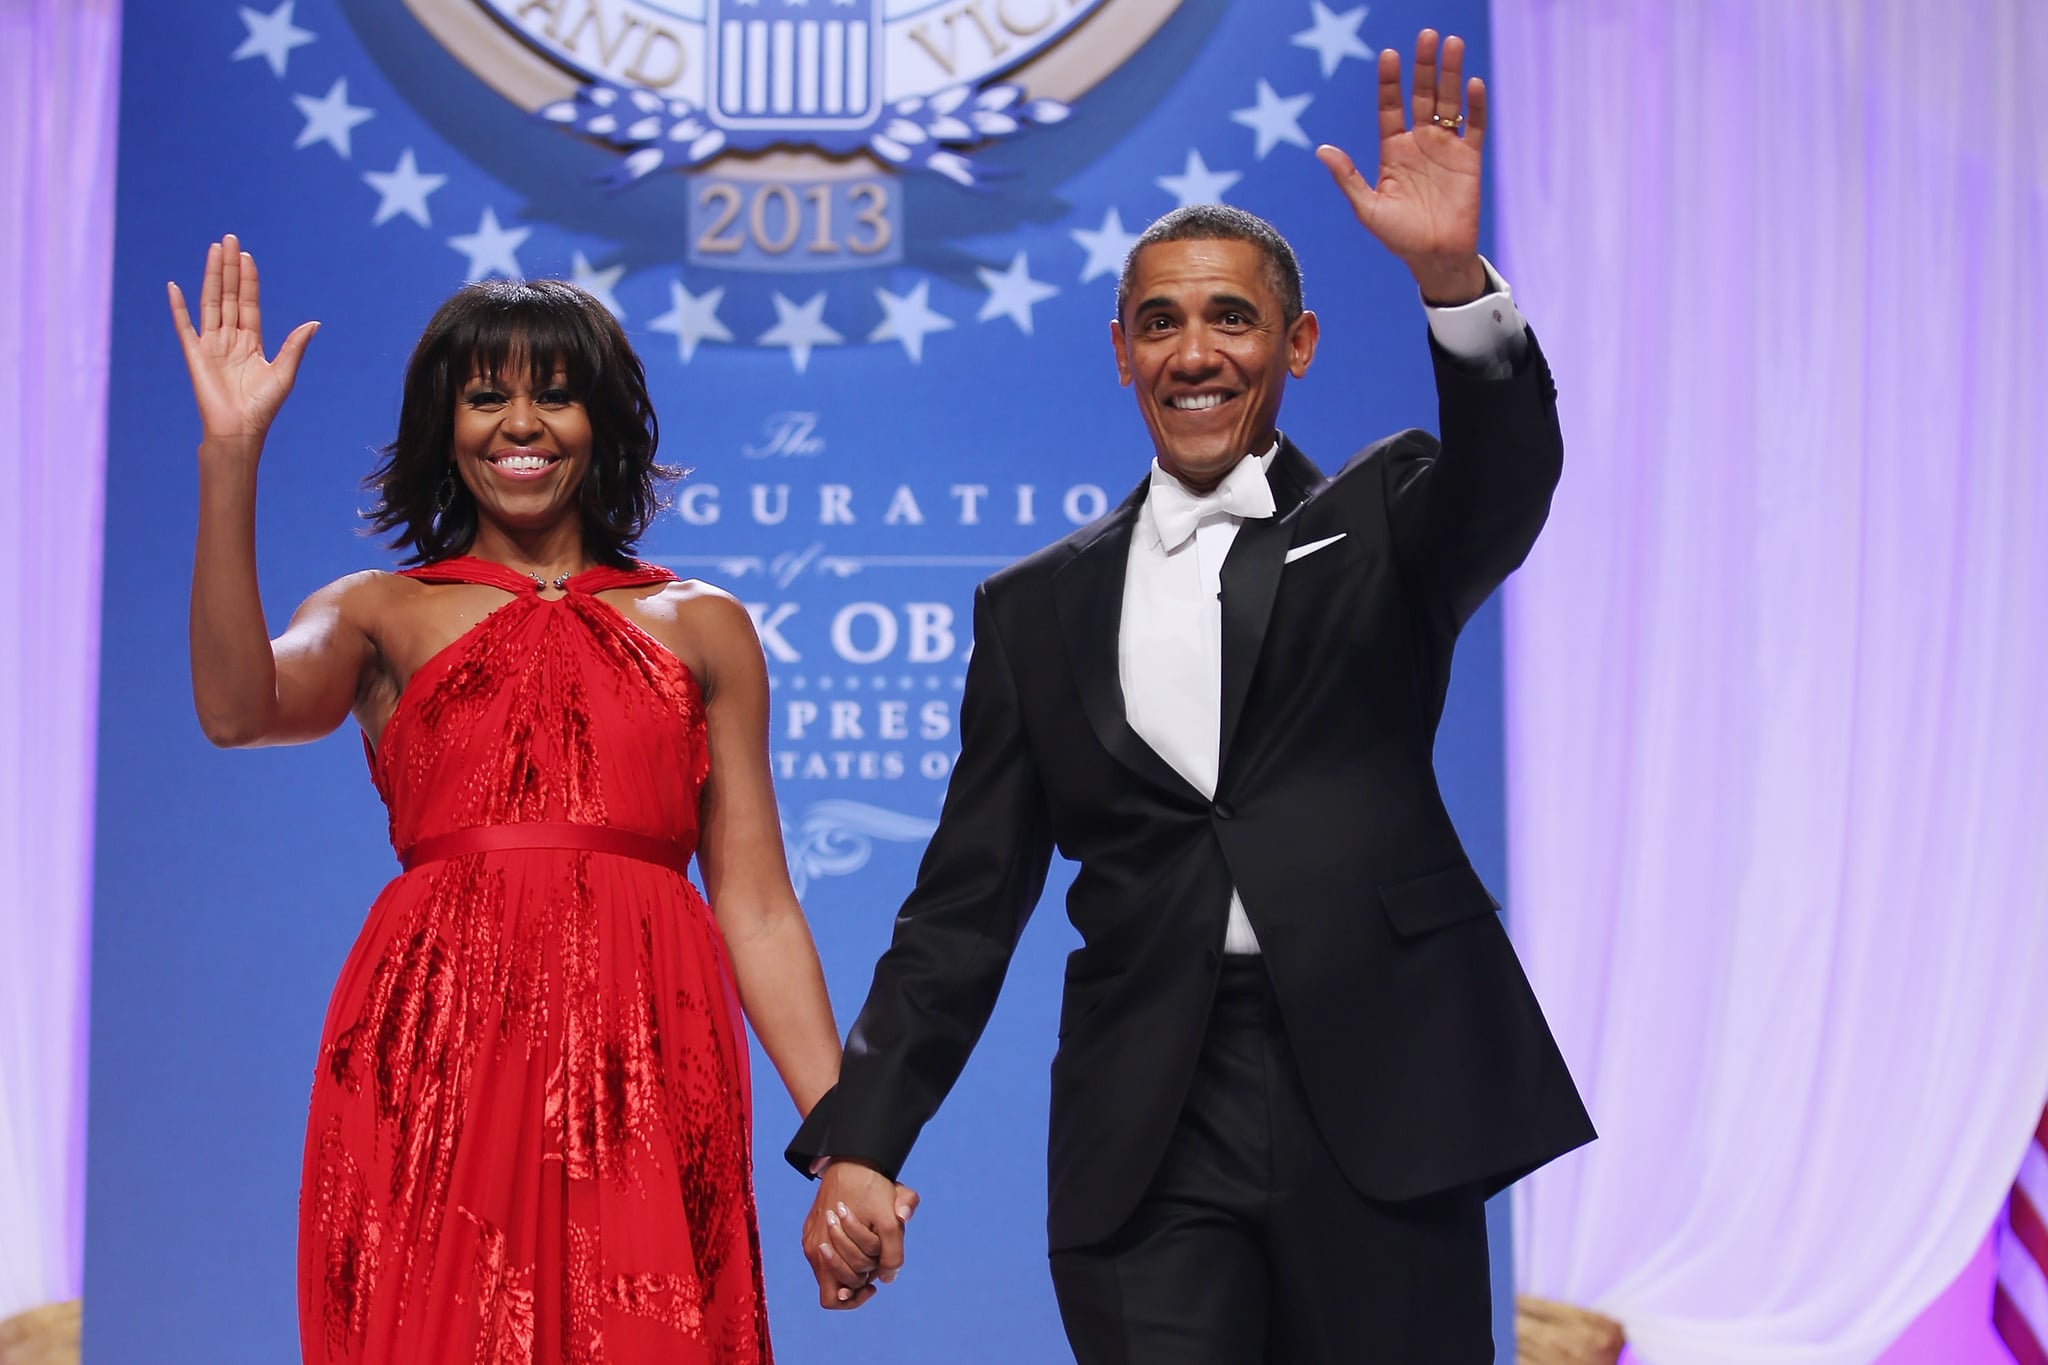 WASHINGTON, DC - JANUARY 21:  U.S. President Barack Obama and first lady Michelle Obama arrive for the Comander-in-Chief's Inaugural Ball at the Walter Washington Convention Center January 21, 2013 in Washington, DC. Obama was sworn-in for his second term of office earlier in the day.  (Photo by Chip Somodevilla/Getty Images)